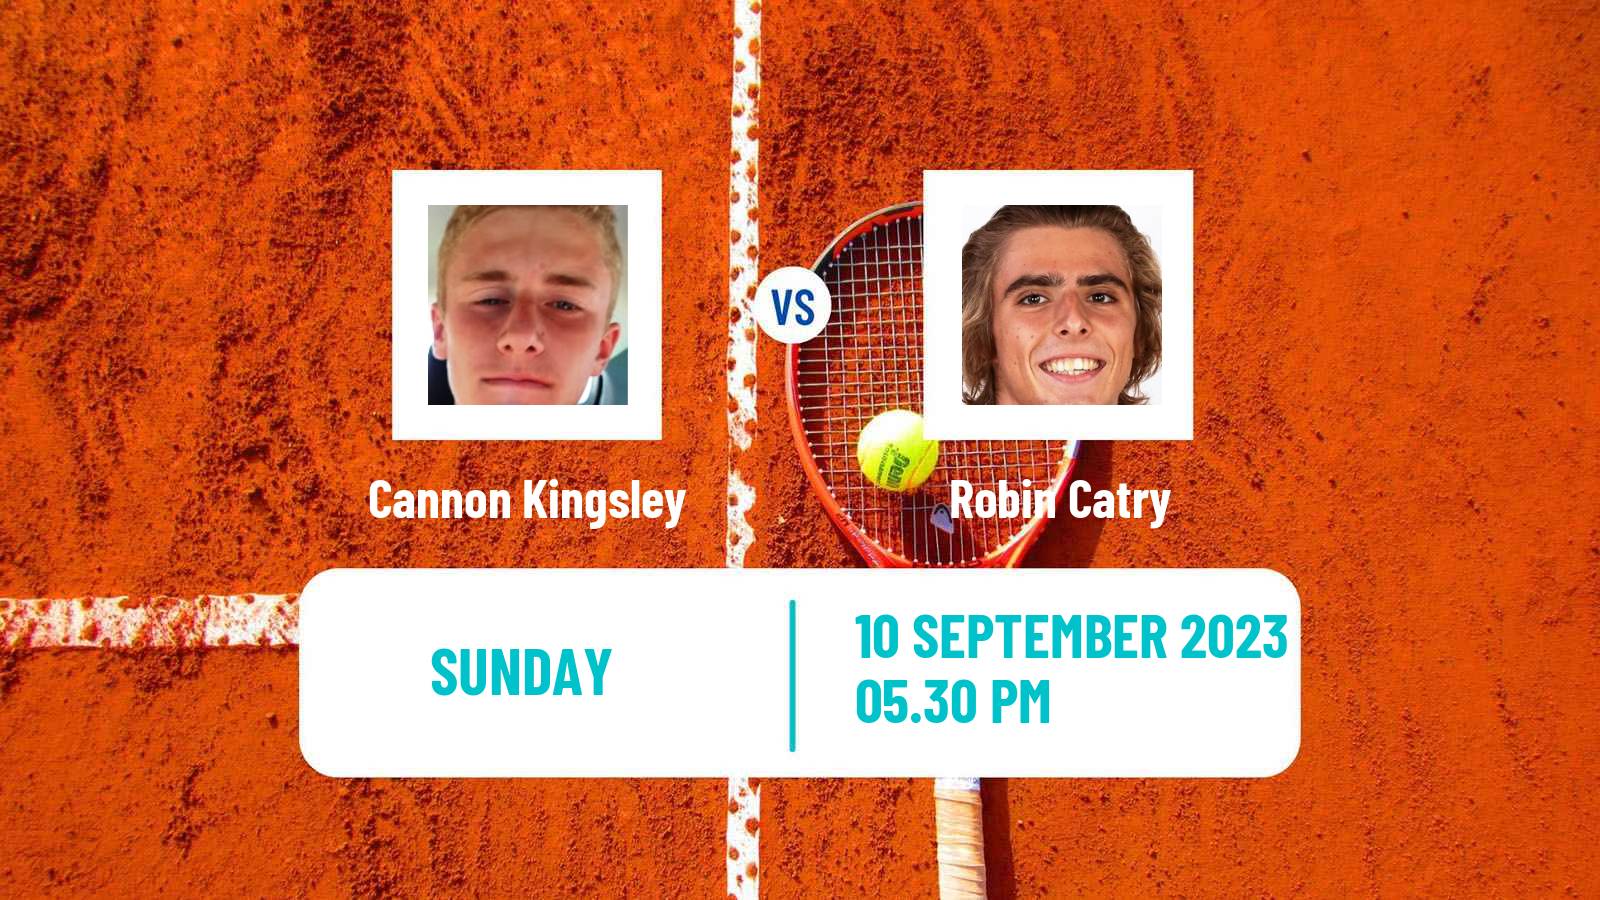 Tennis Cary 2 Challenger Men Cannon Kingsley - Robin Catry